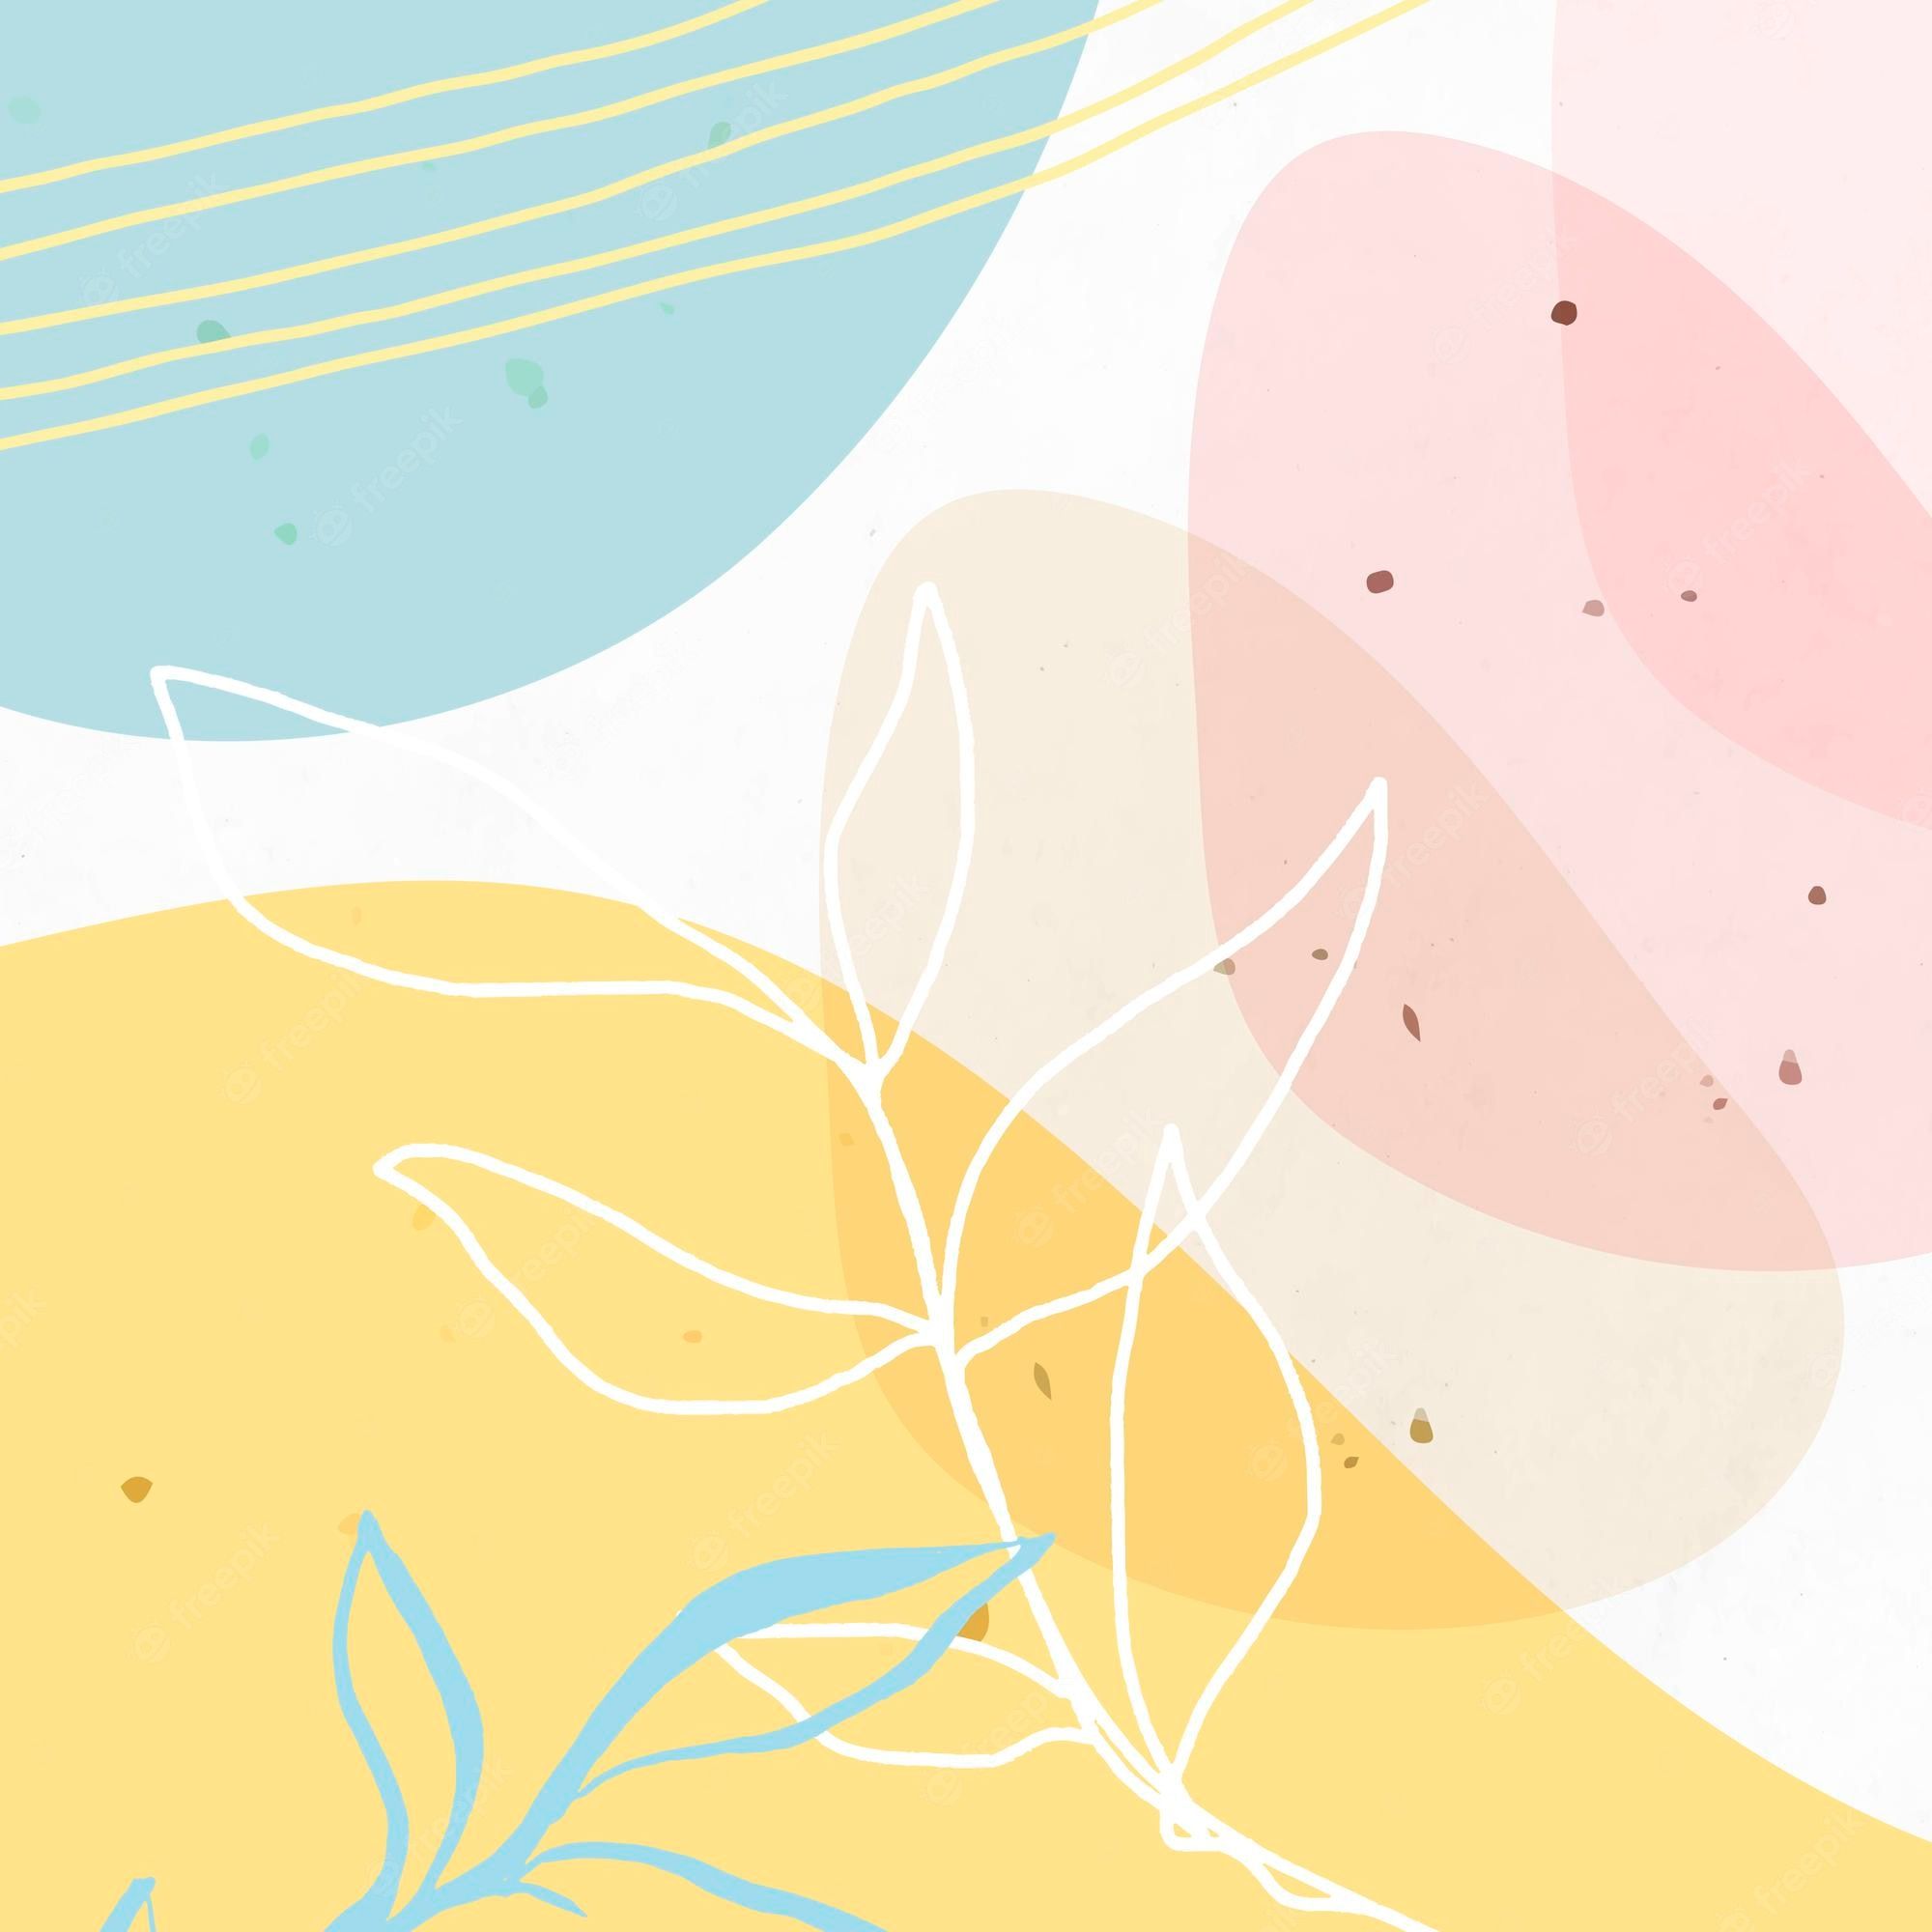 A colorful abstract design with leaves and lines - Pastel yellow